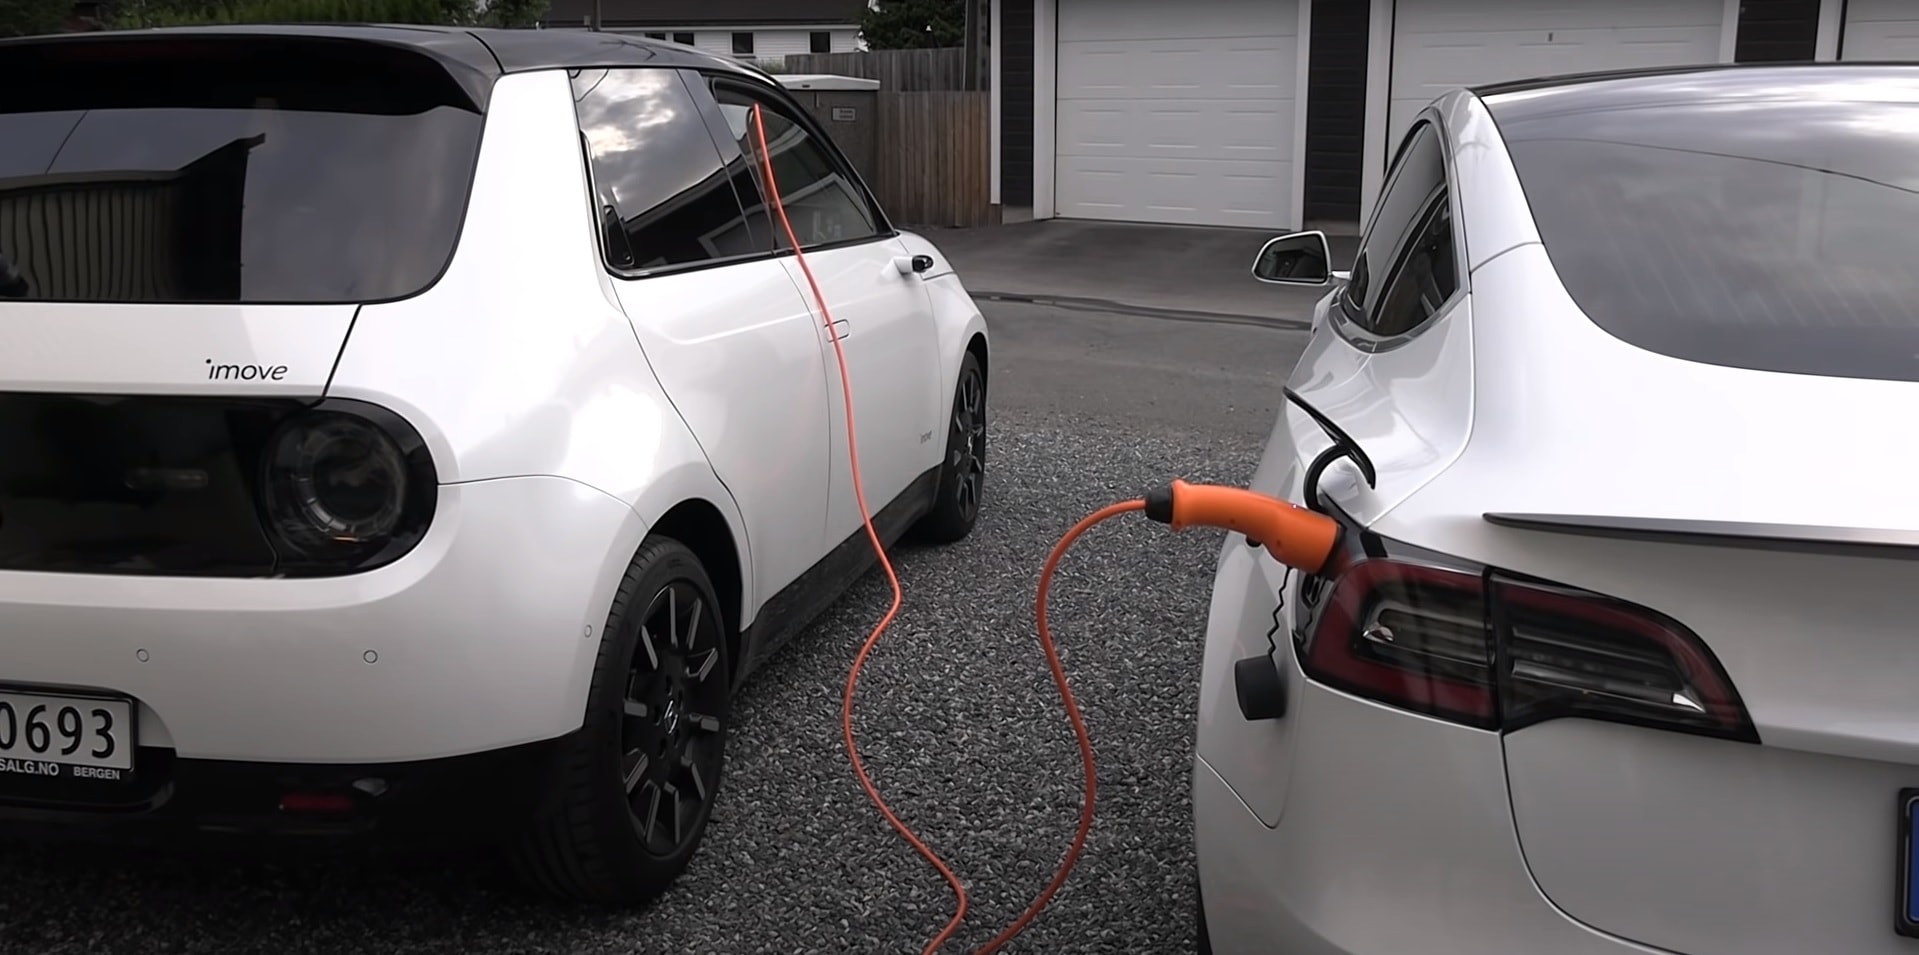 EV charging ports will soon outnumber gas stations in the US, yet it won't  be enough